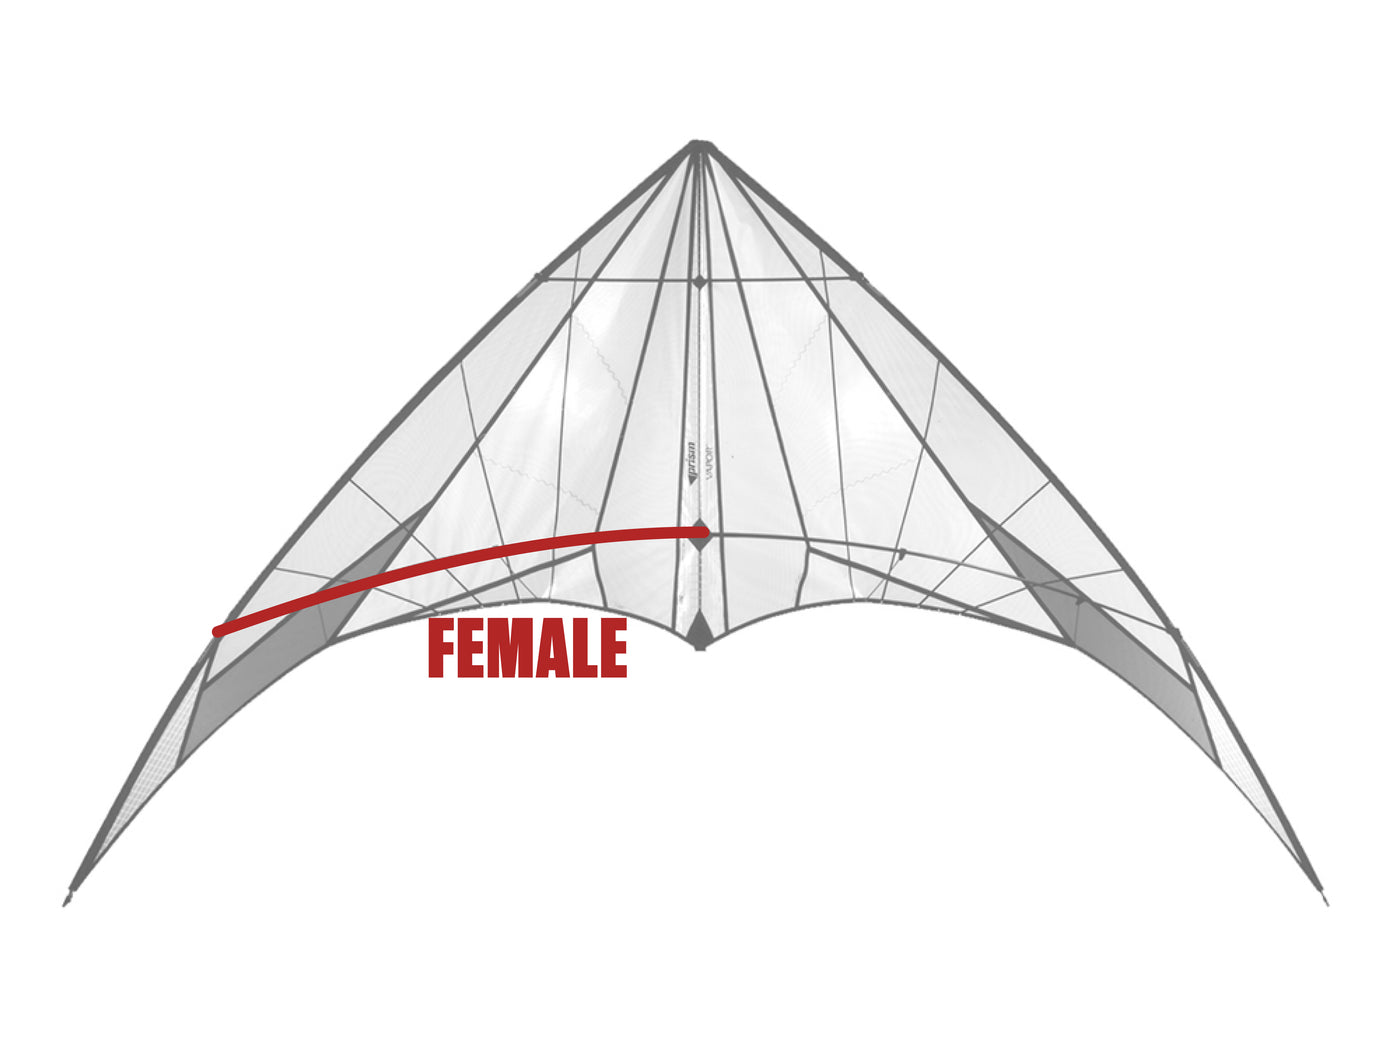 Diagram showing location of the Vapor (1996) Lower Spreader (Female) on the kite.